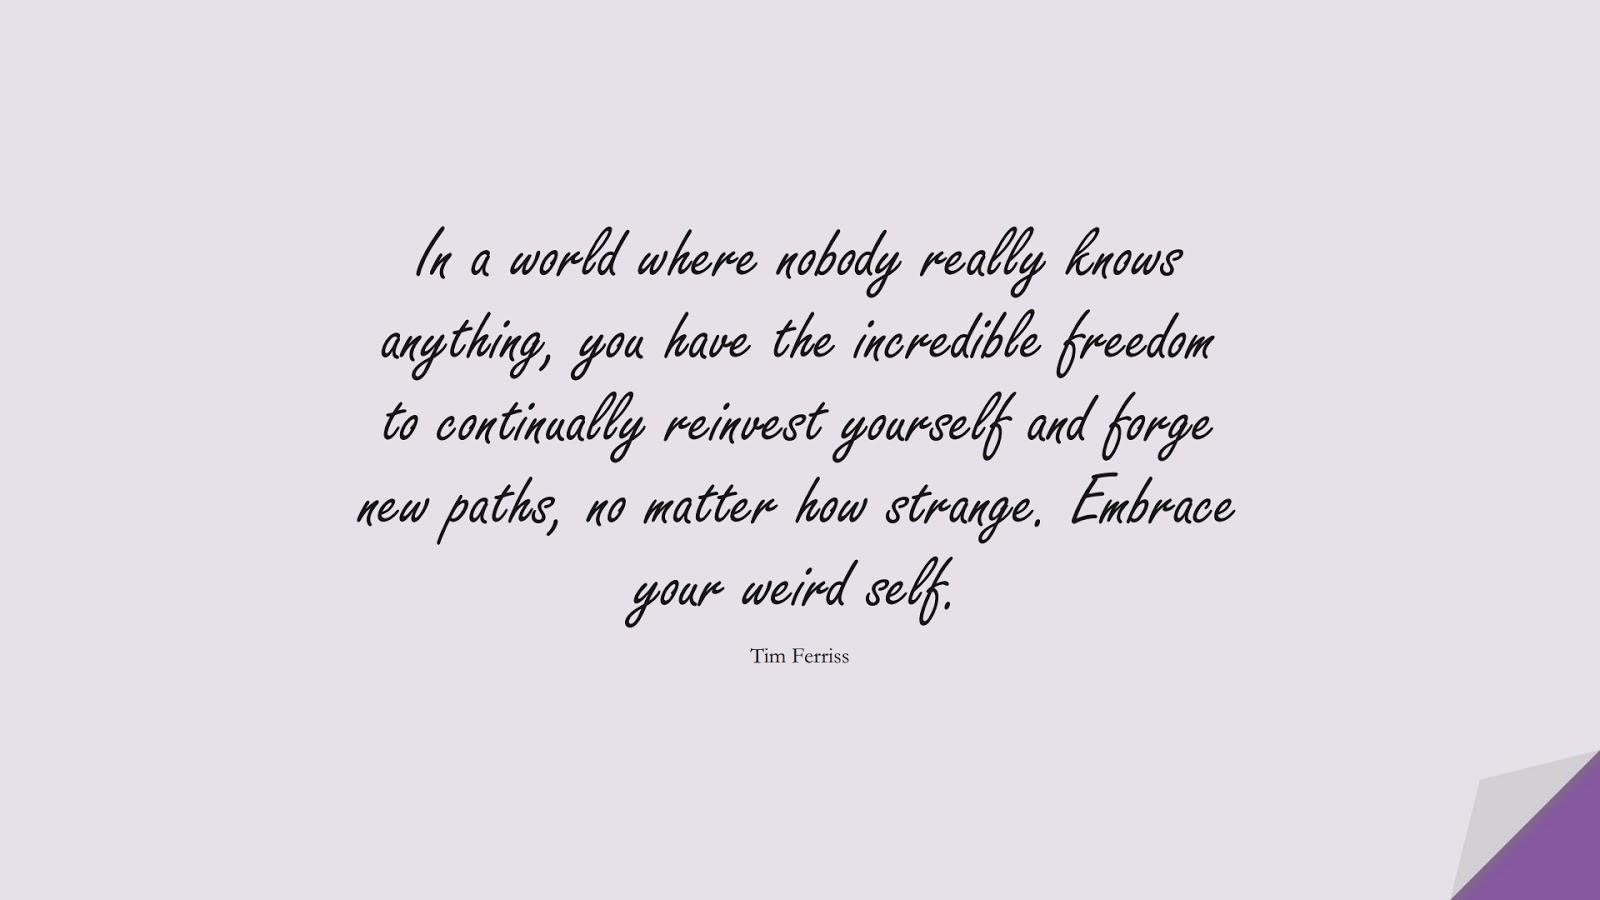 In a world where nobody really knows anything, you have the incredible freedom to continually reinvest yourself and forge new paths, no matter how strange. Embrace your weird self. (Tim Ferriss);  #TimFerrissQuotes